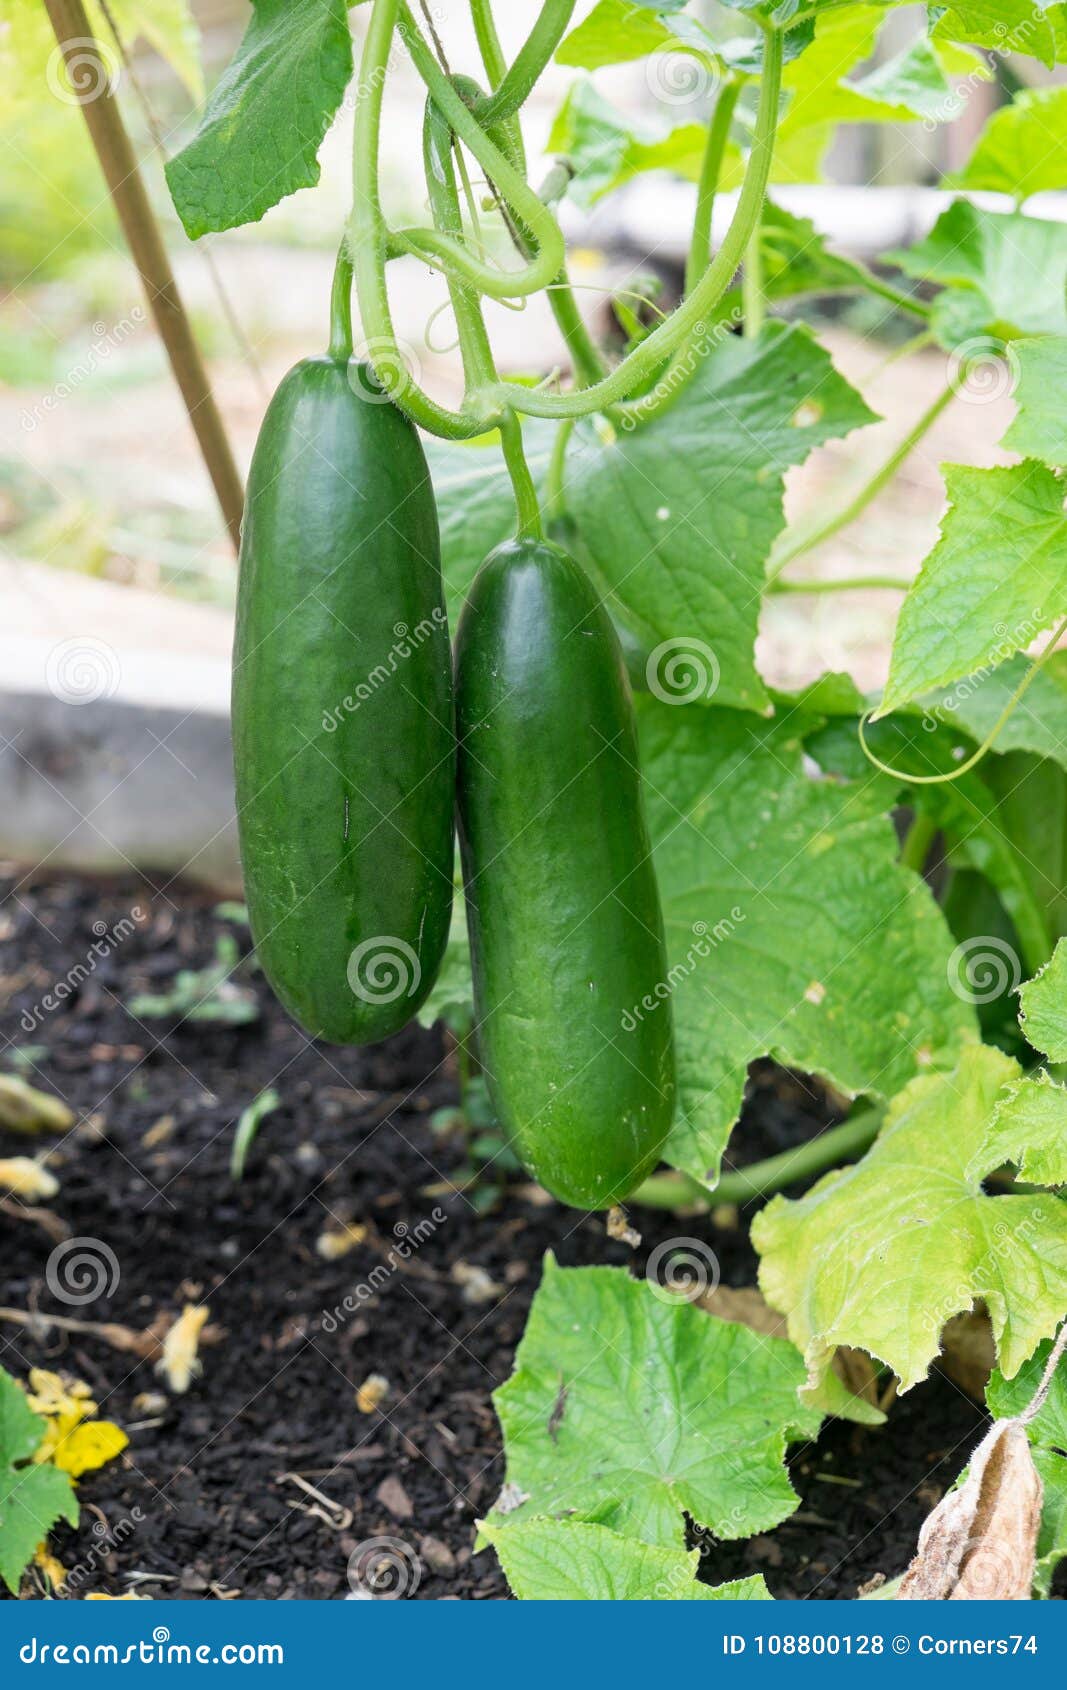 imperfect ripe green cucumbers growing in garden bed - cultivar